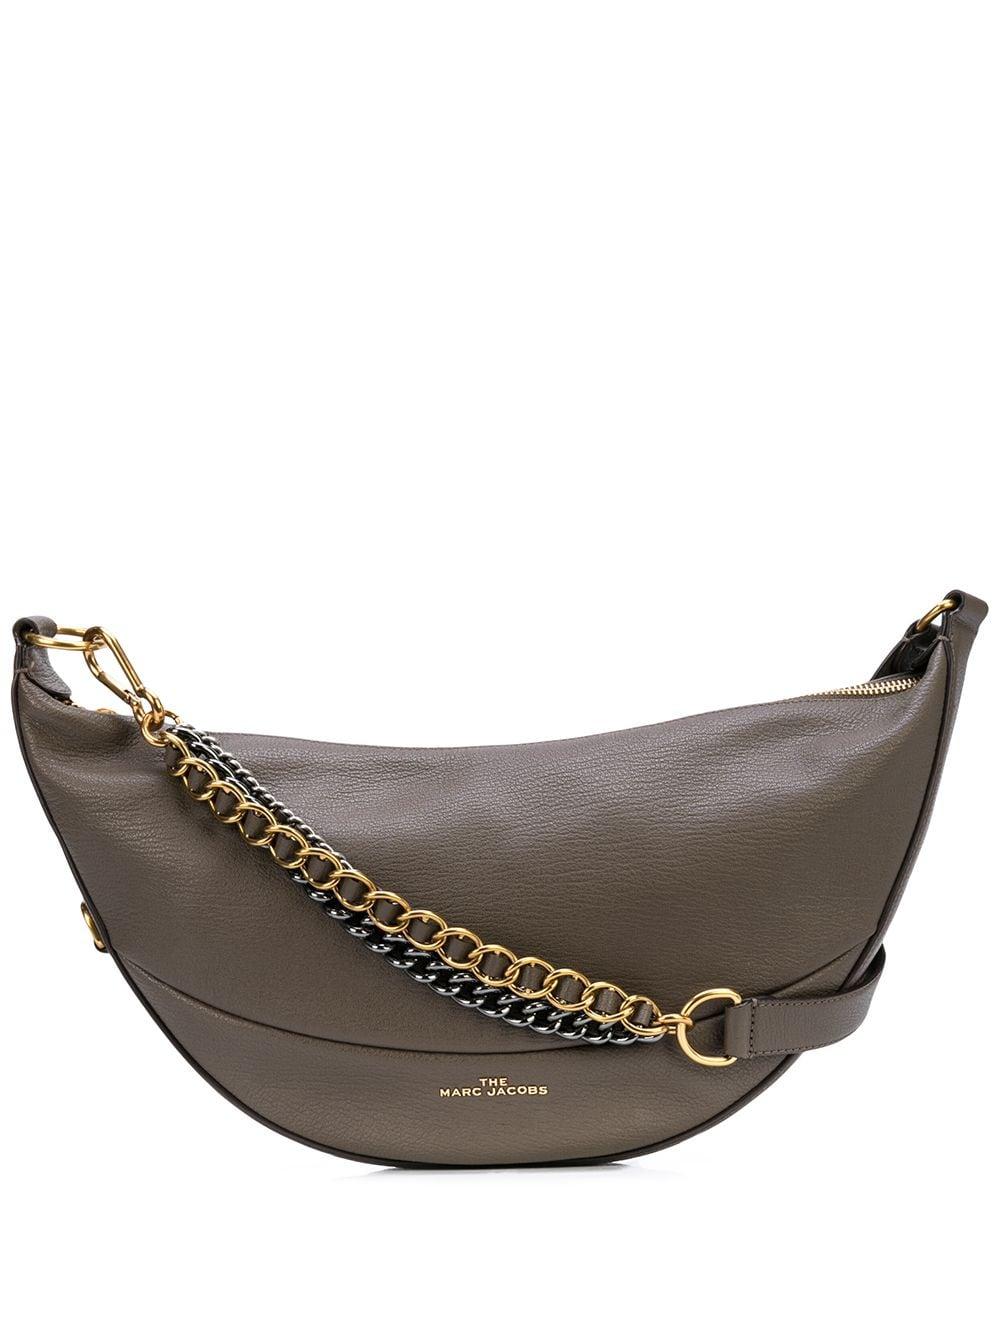 Marc Jacobs Leather The Eclipse Bag in Grey (Gray) - Lyst